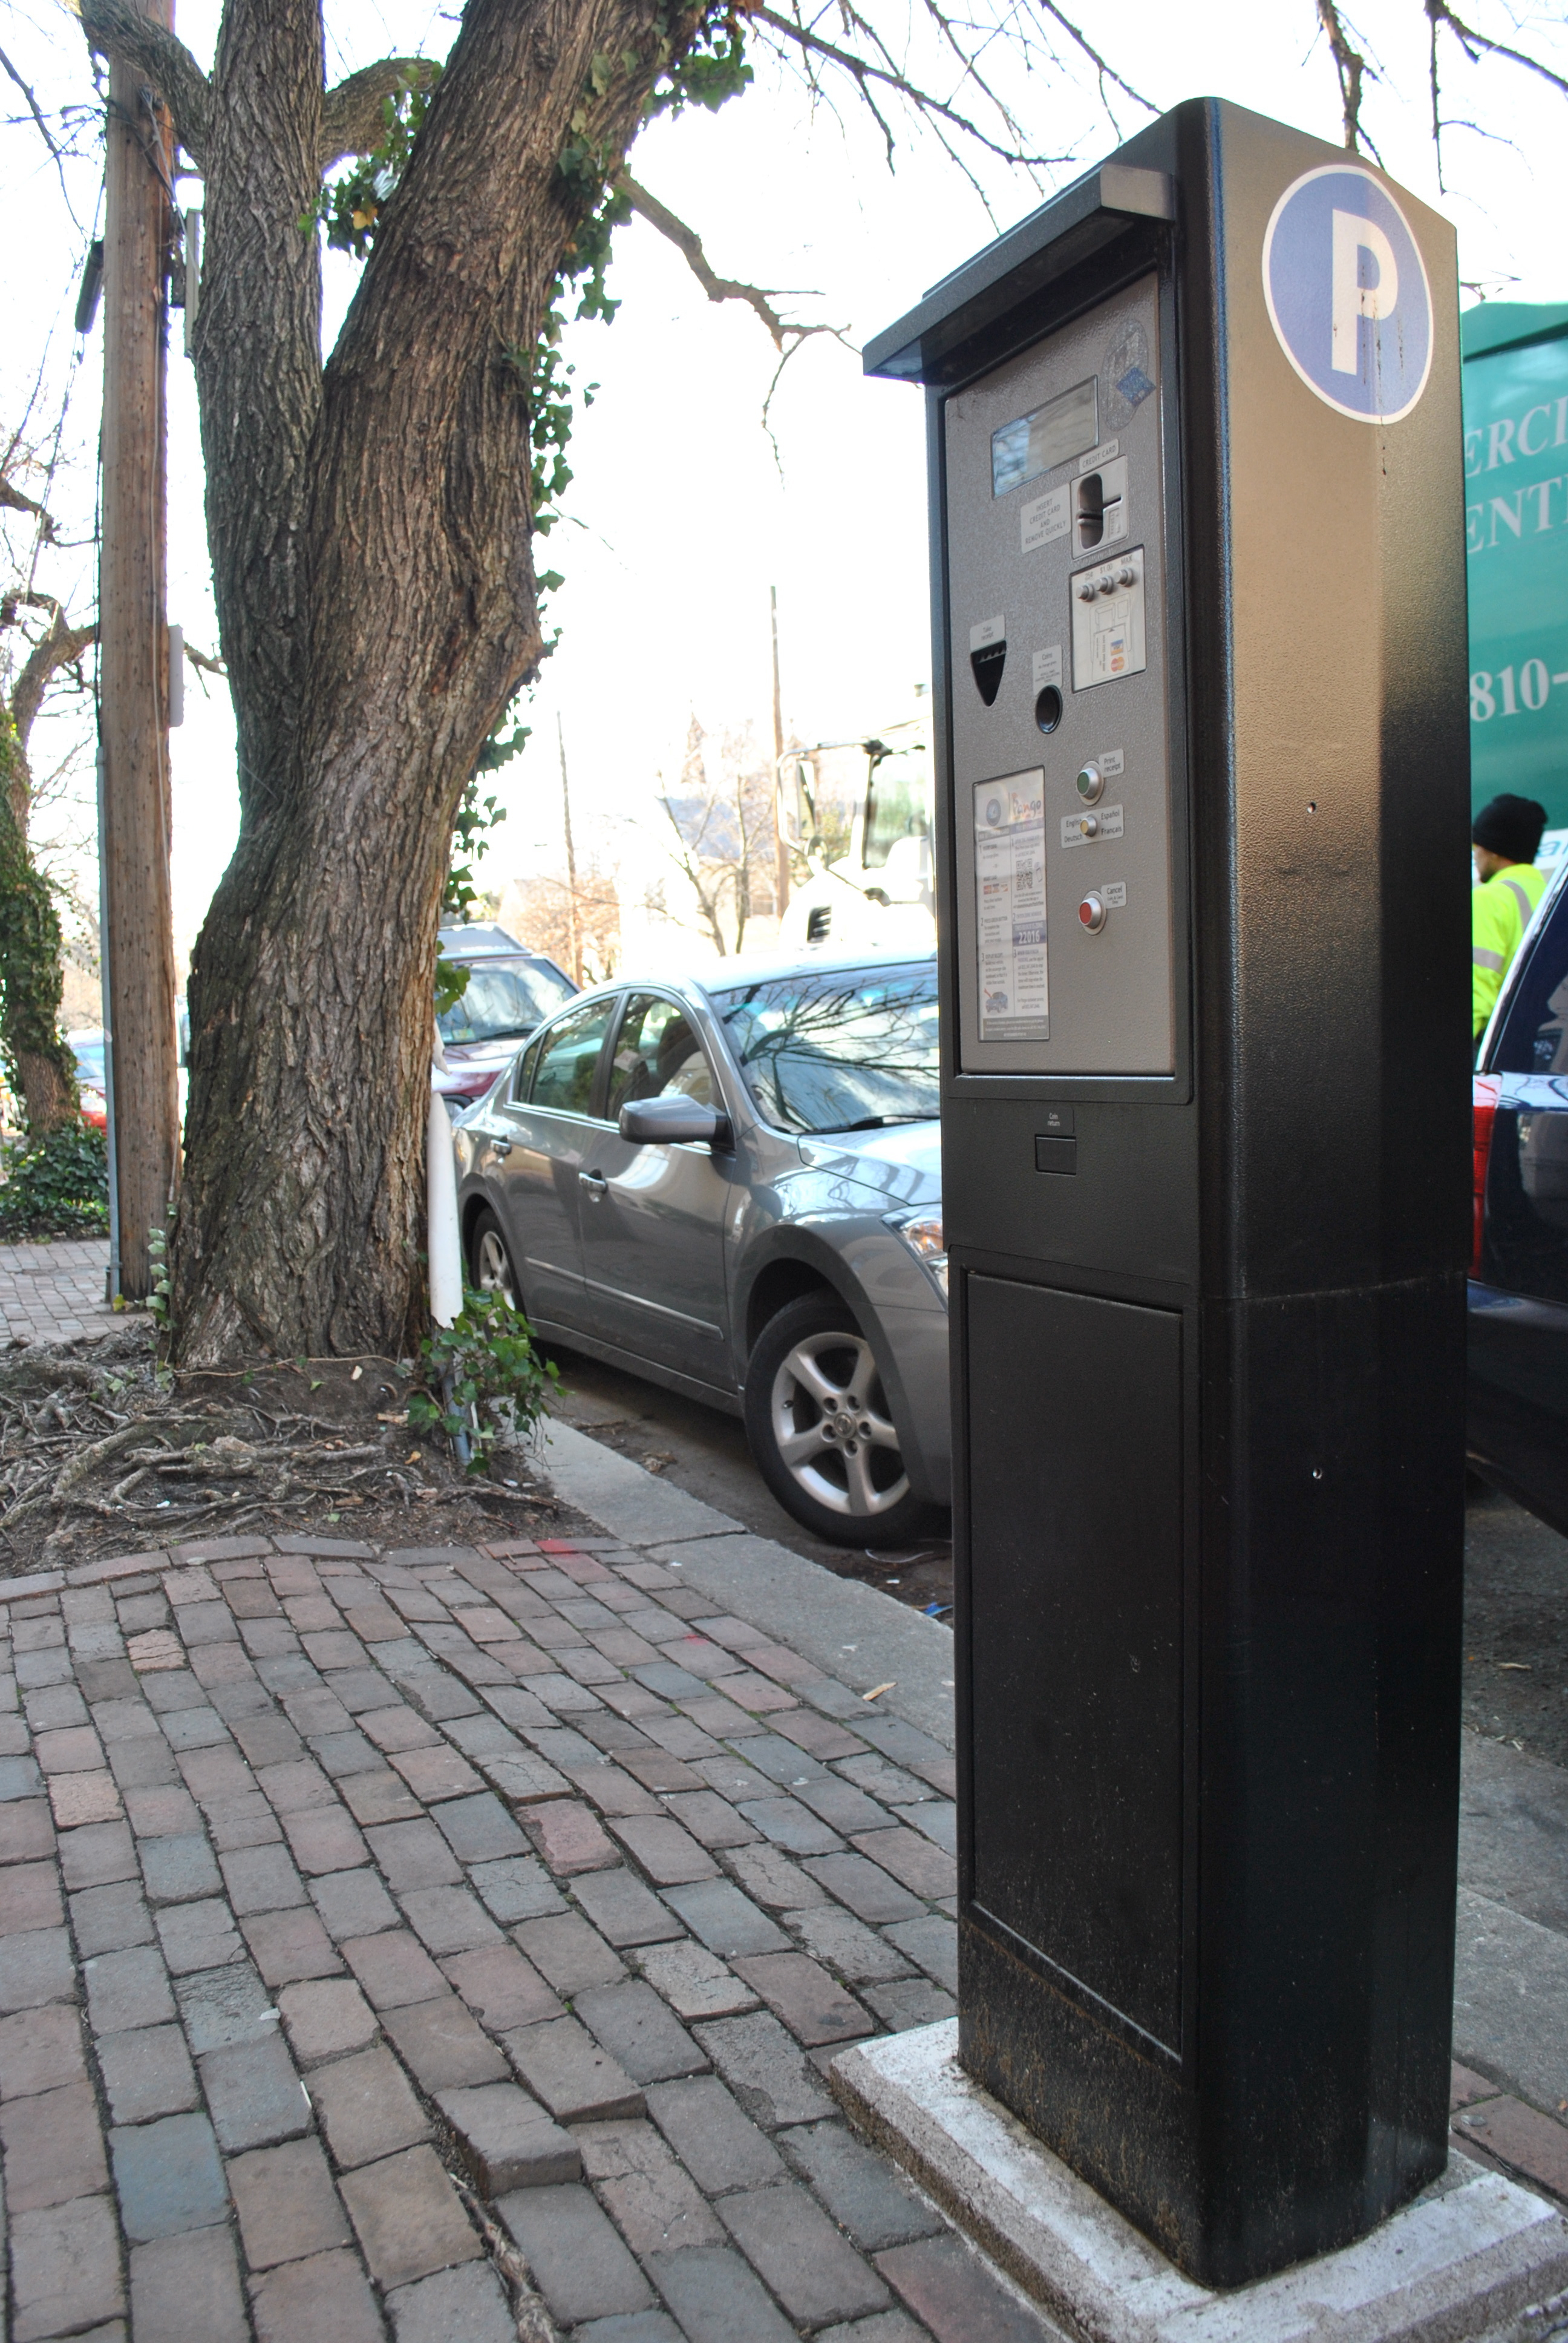 City rolls out smartphone app for parking meters